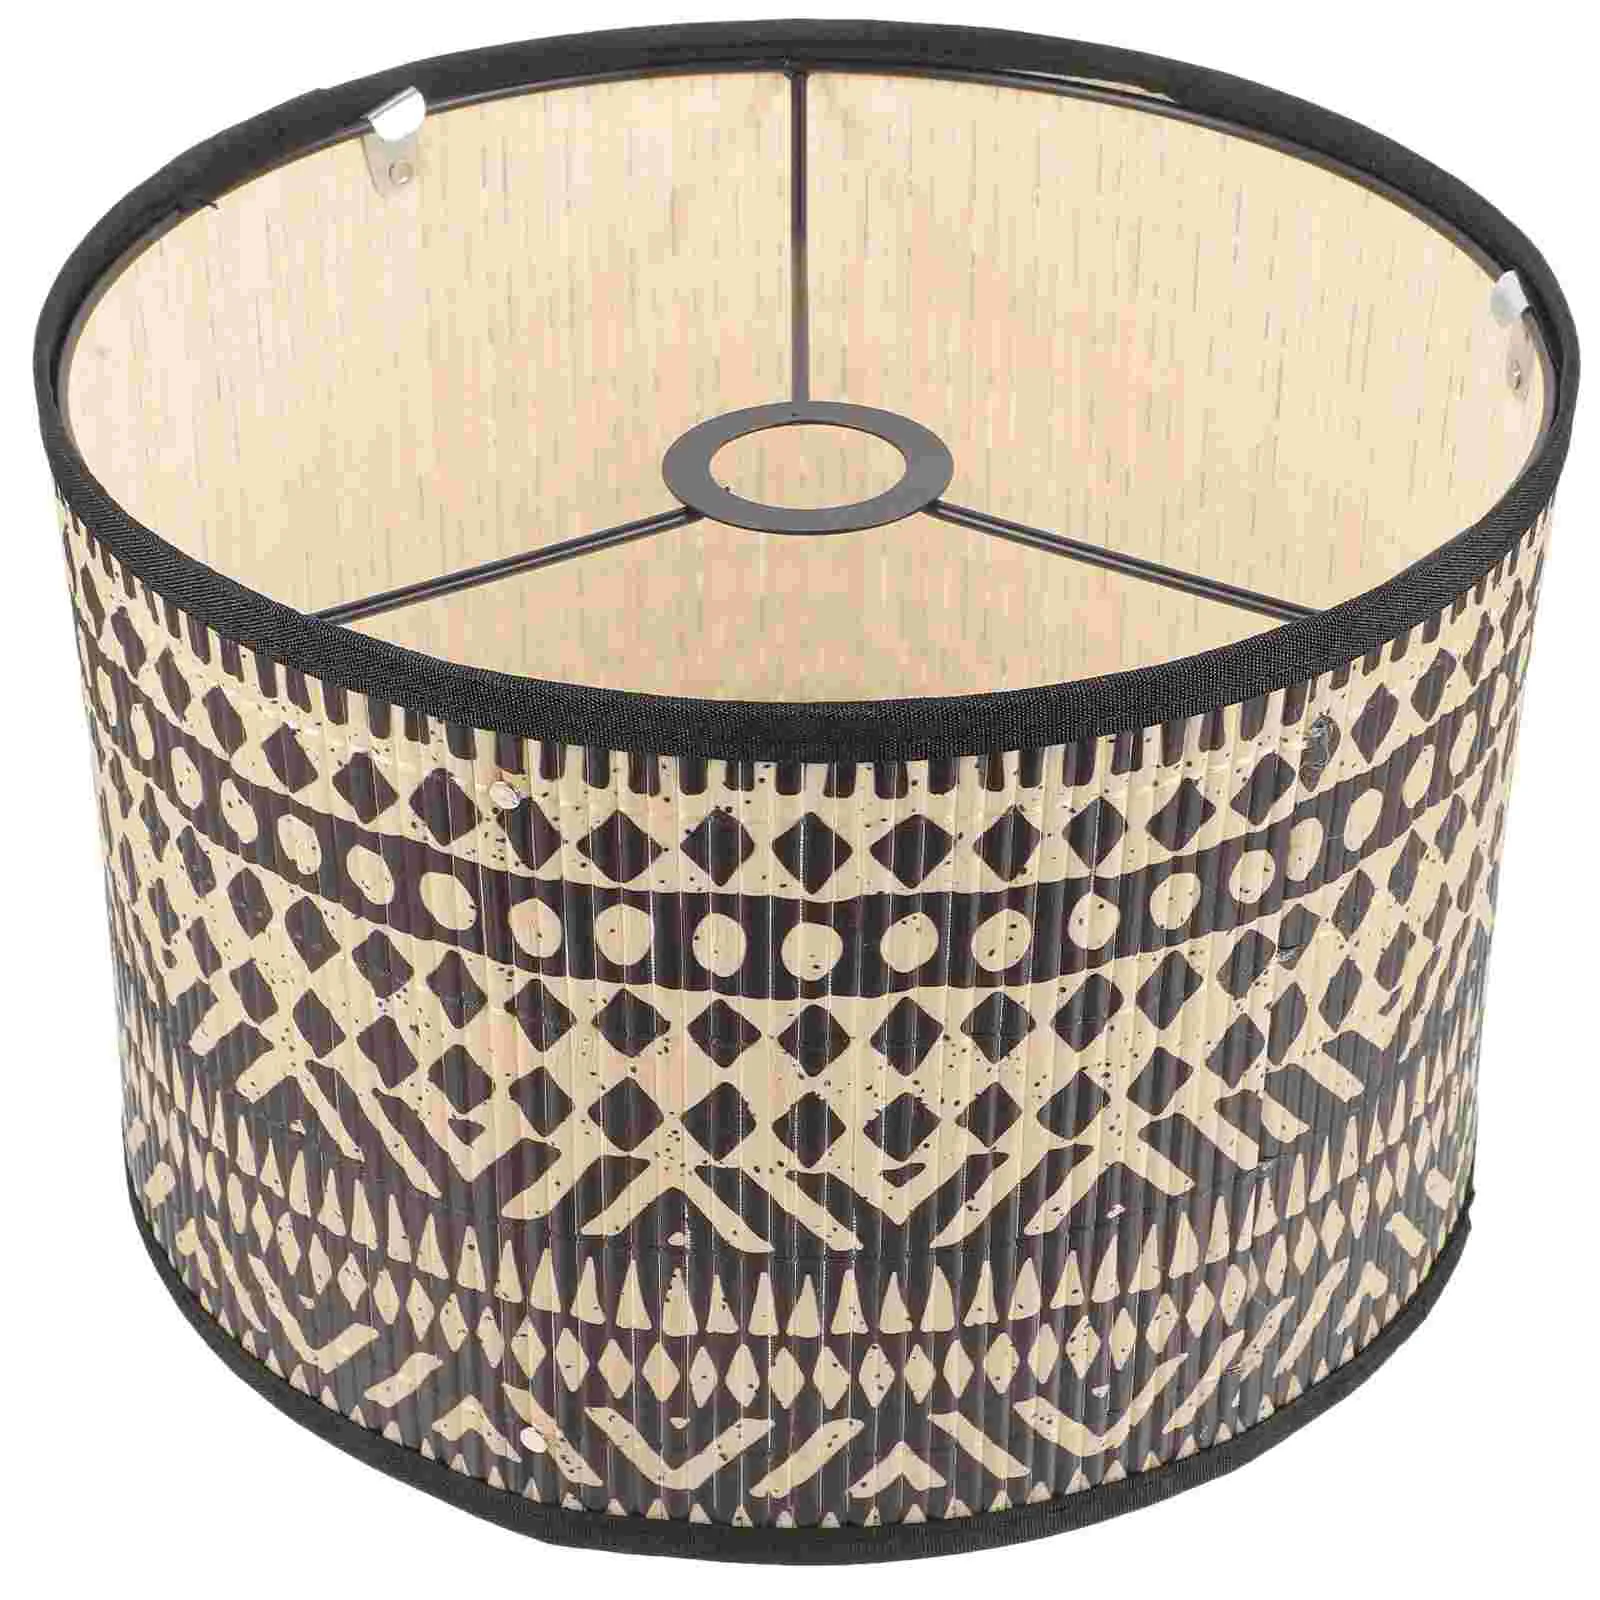 

Lamp Shade Large Woven Rustic Shades Cover Pendant Light Only Hanging Replacement Parts Modern Unique Decor